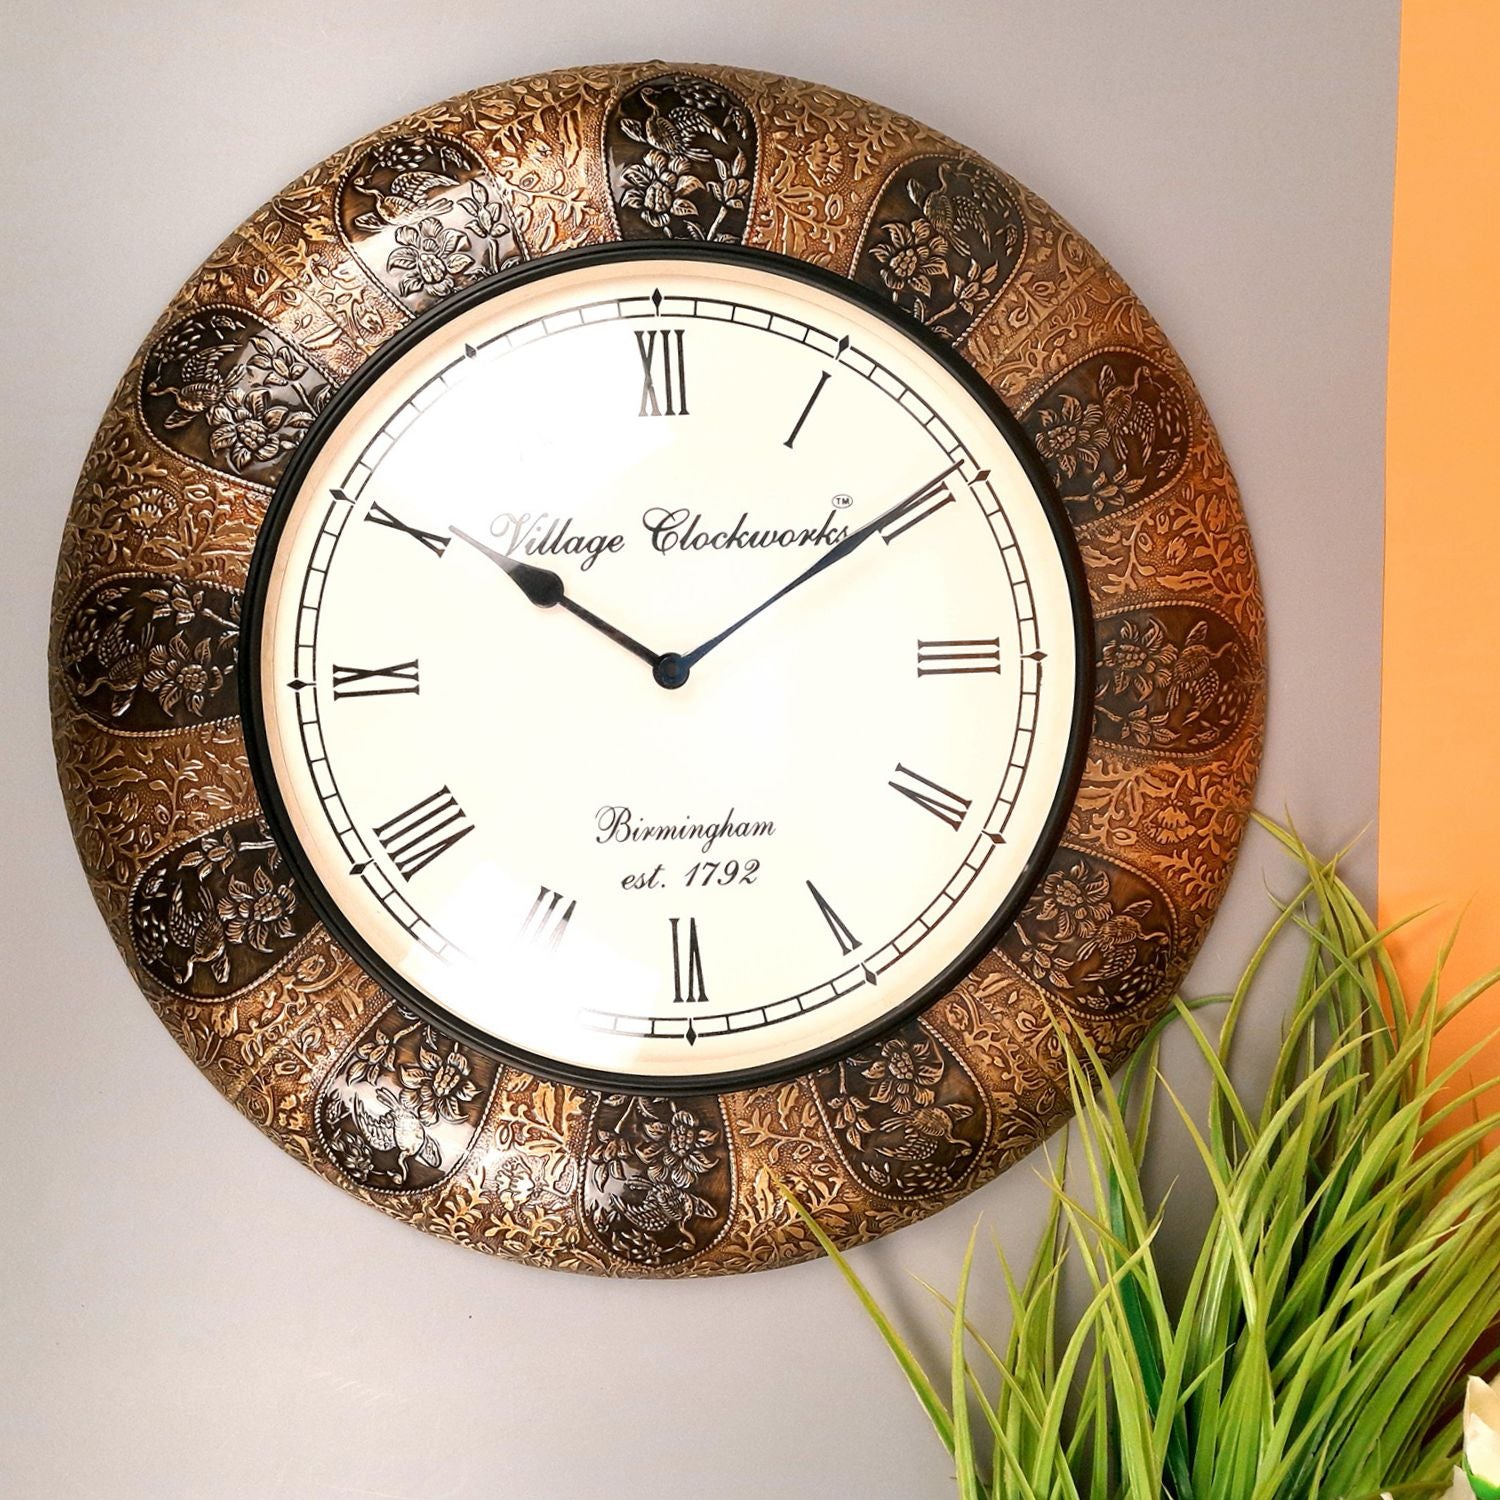 Wall Clock Hanging | Analogue Clock Antique With Wooden & Brass Finish - For Home, Living Room, Bedroom, Hall Decor | Wedding & Housewarming Gift - 18 Inch - Apkamart